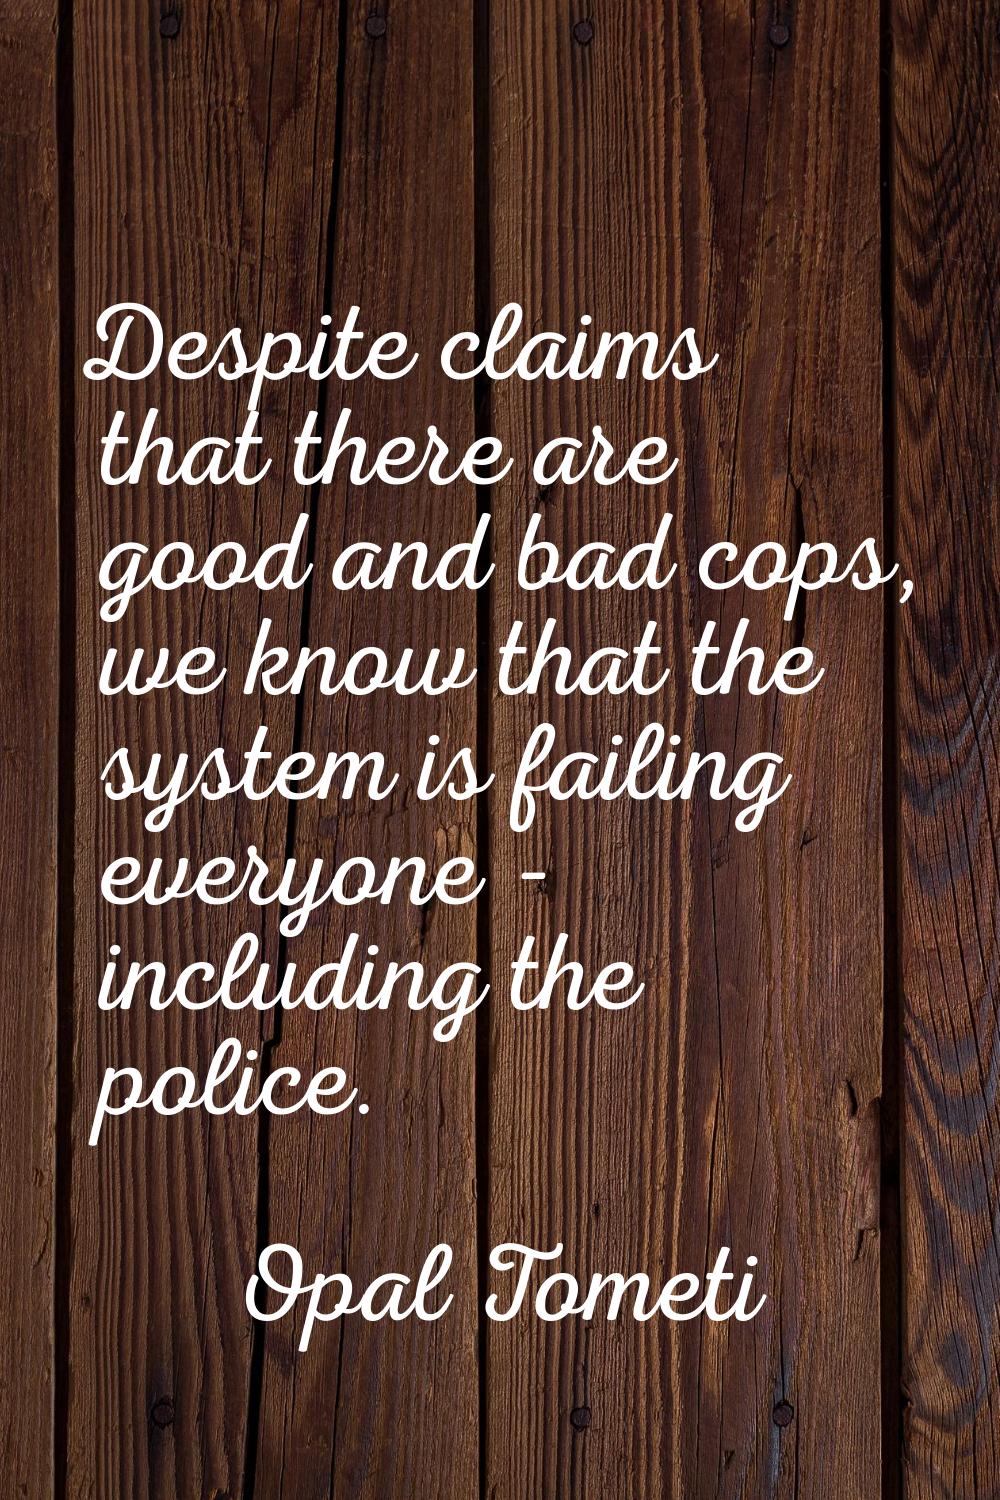 Despite claims that there are good and bad cops, we know that the system is failing everyone - incl